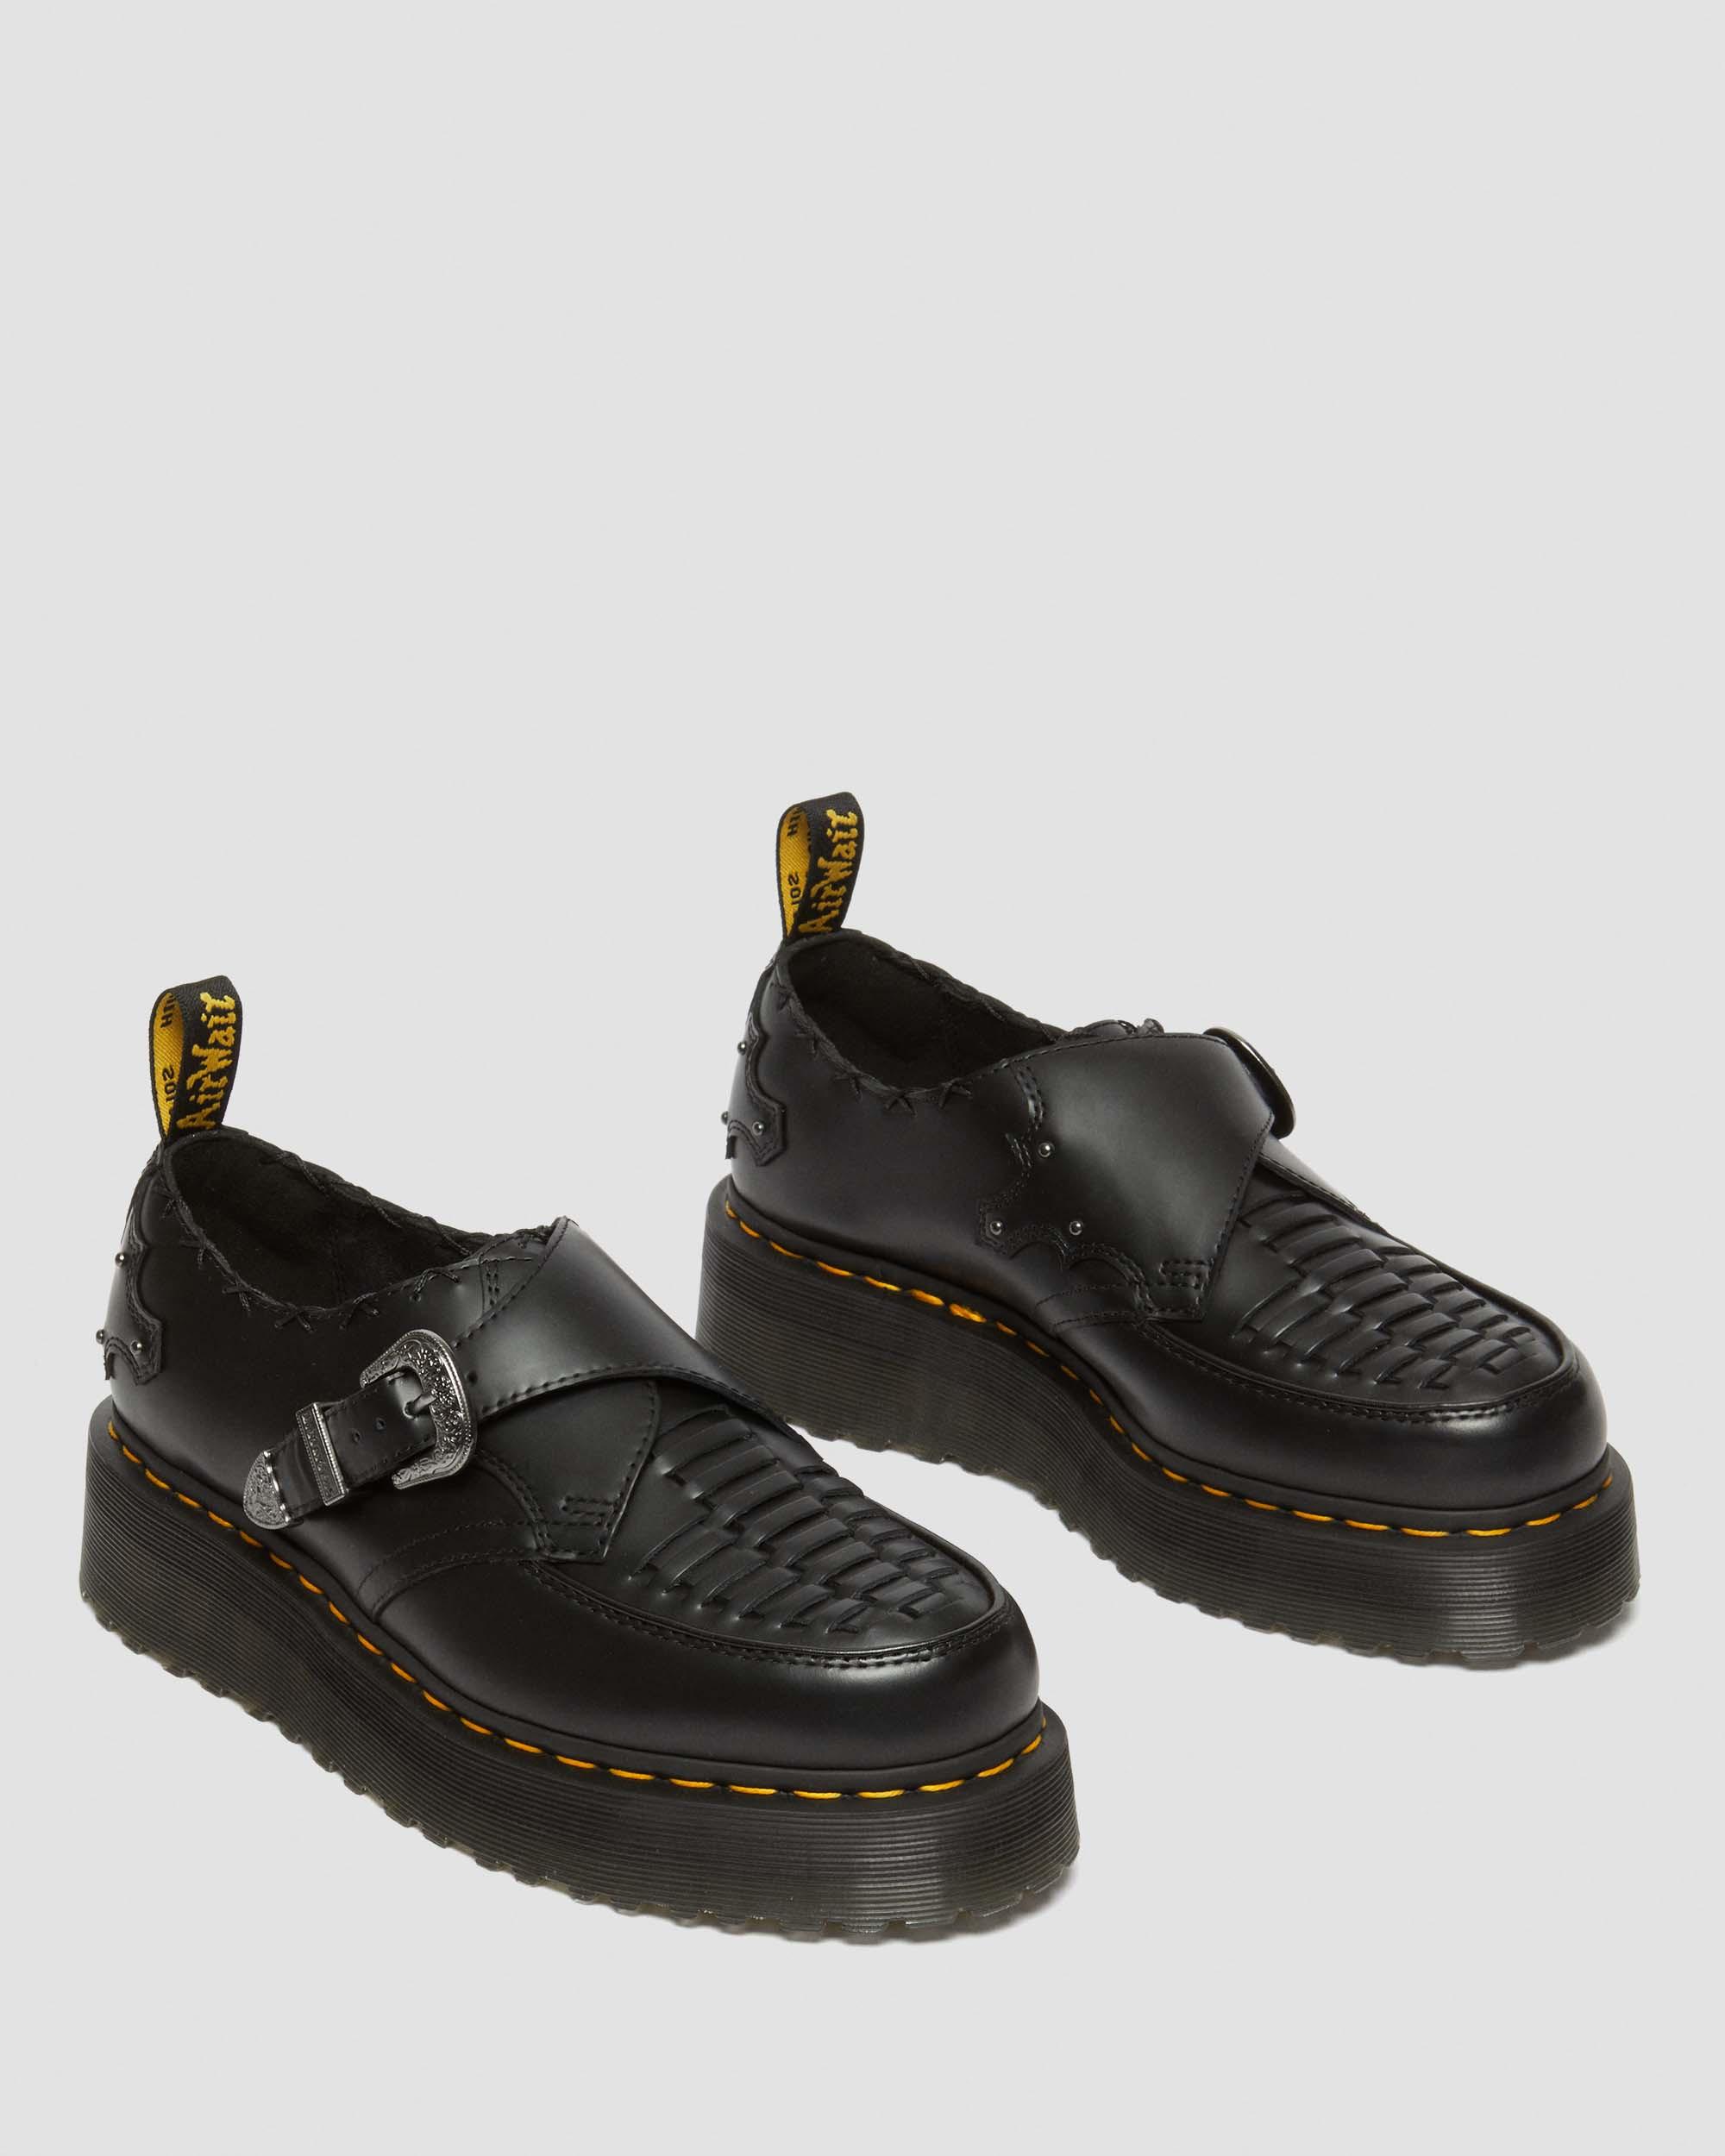 Ramsey Woven Smooth Leather Platform Creepers in Black